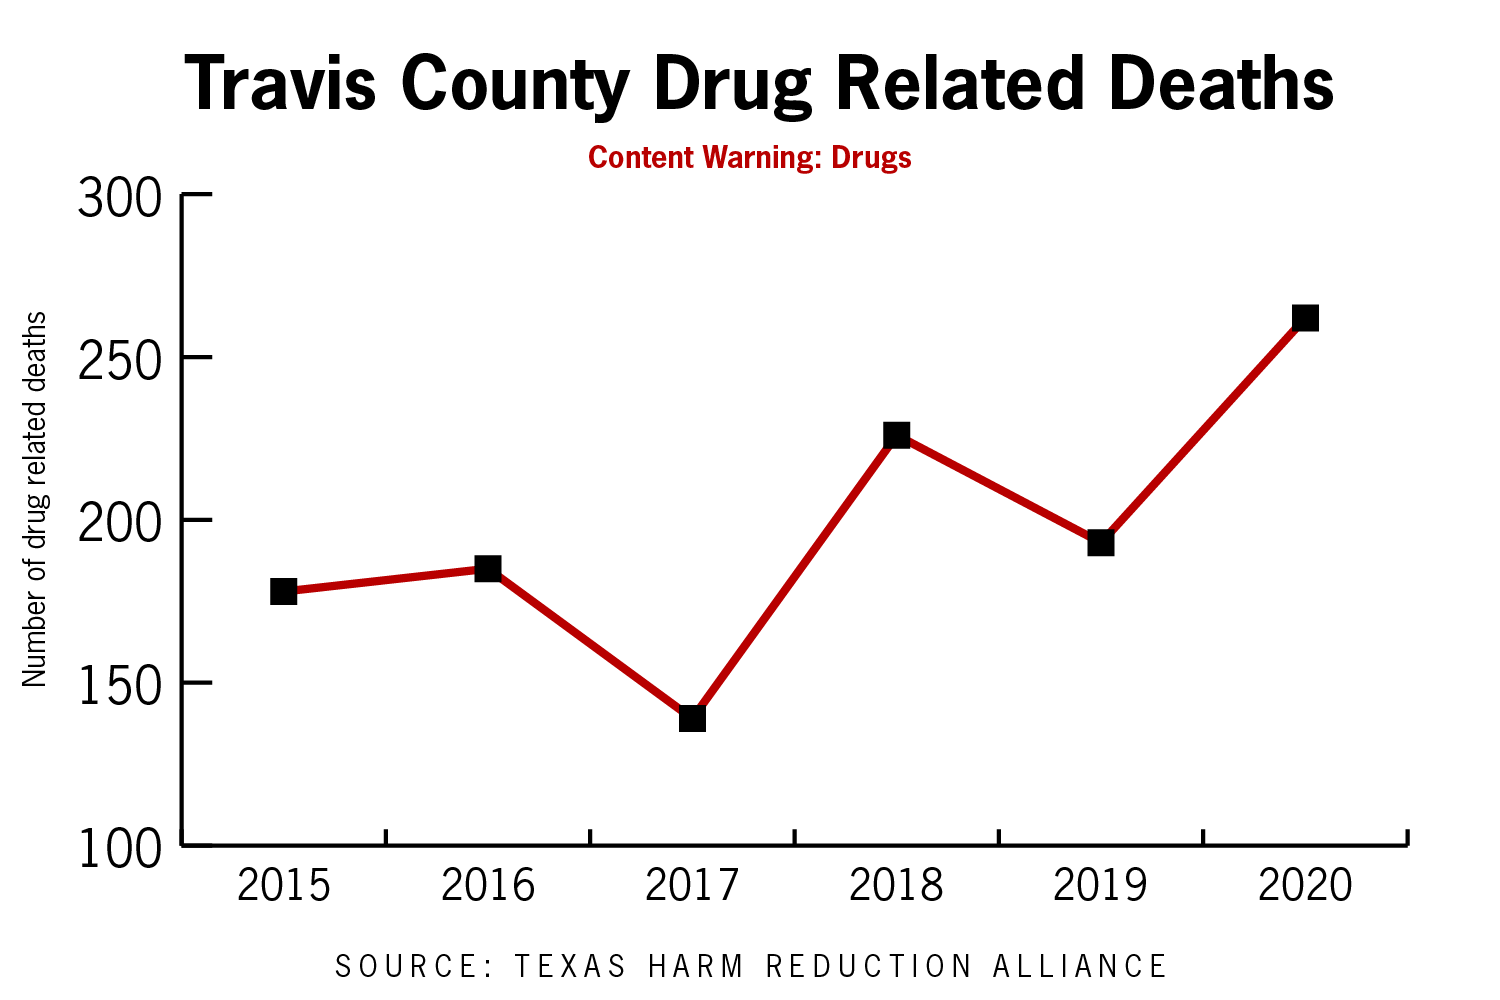 Travis County has highest rate of fentanyl overdoses in Texas - Axios Austin